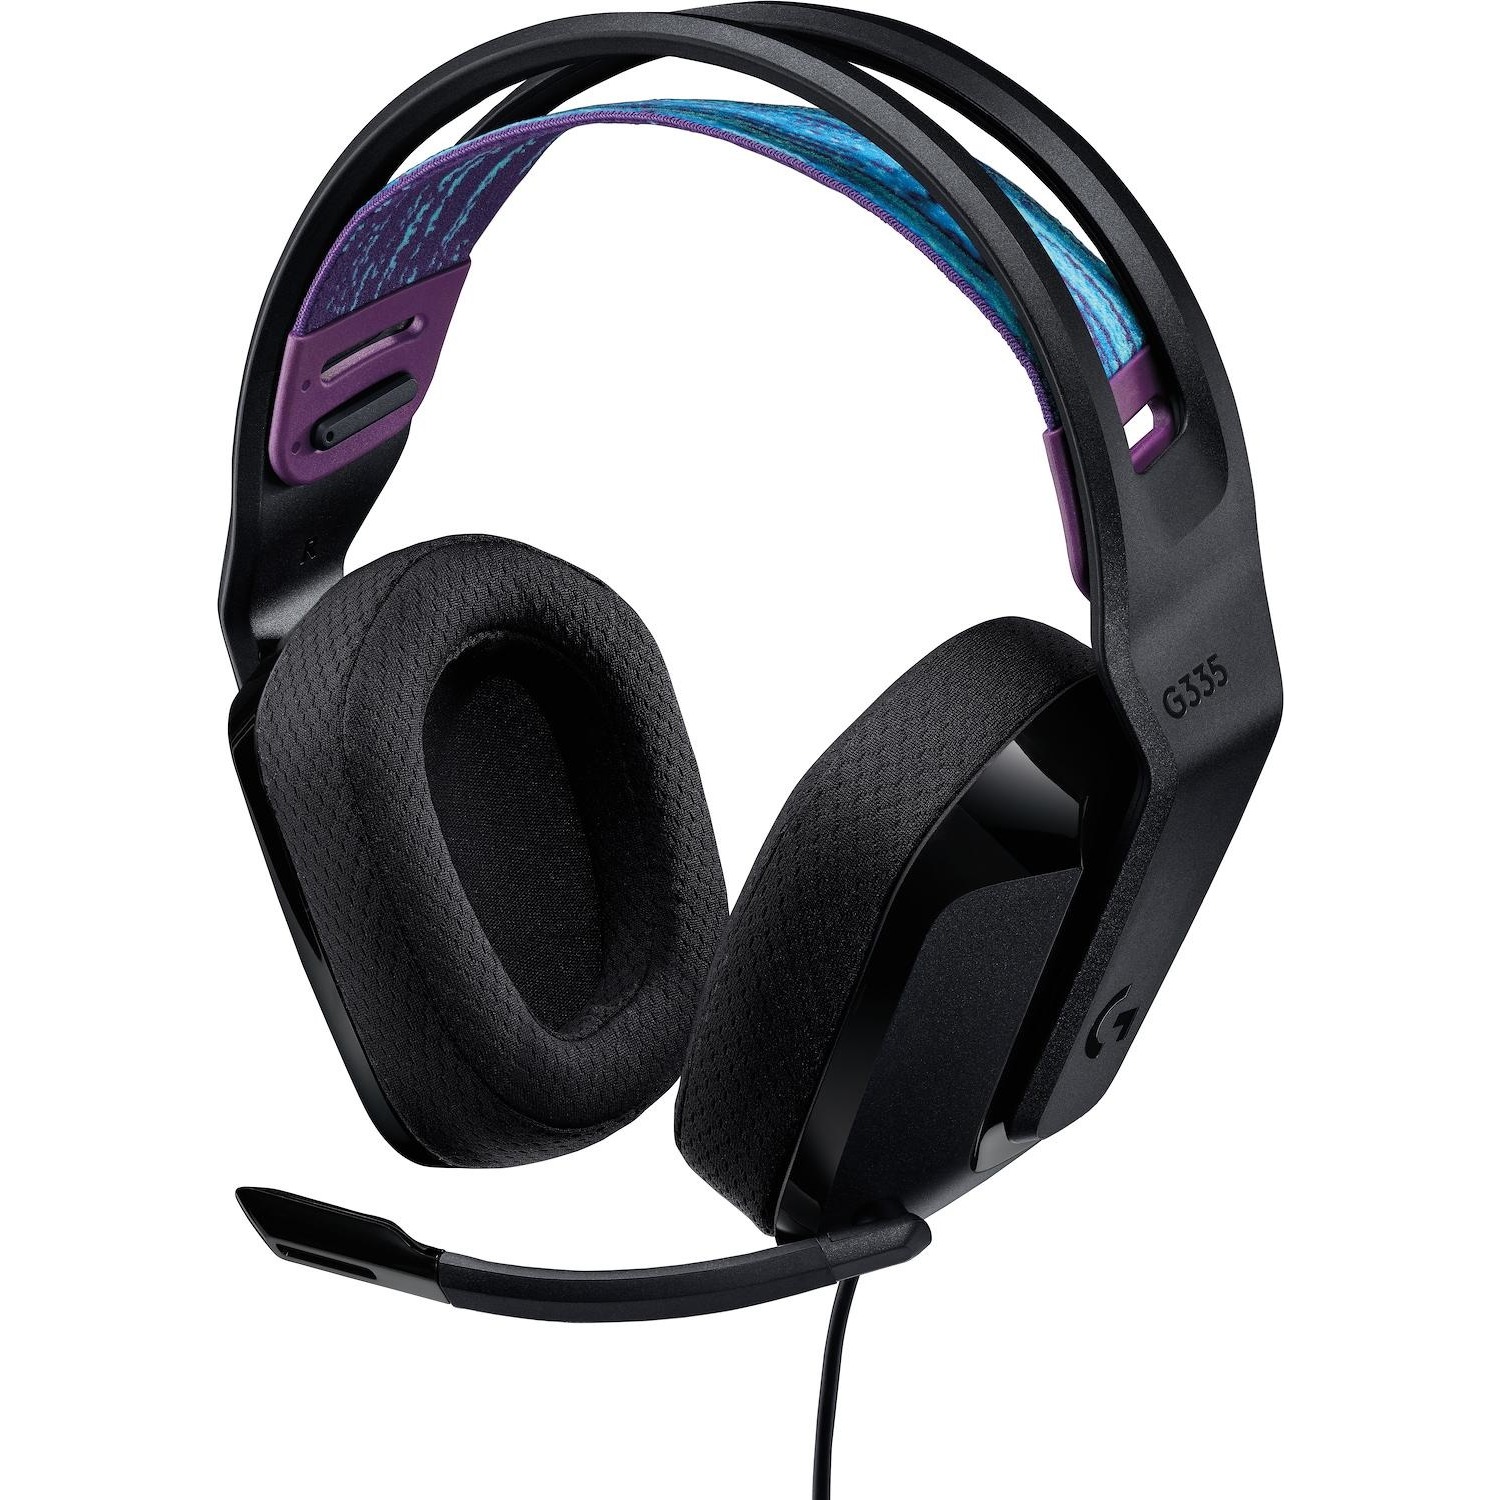 Image of Cuffie gaming Logitech G335 colore nero